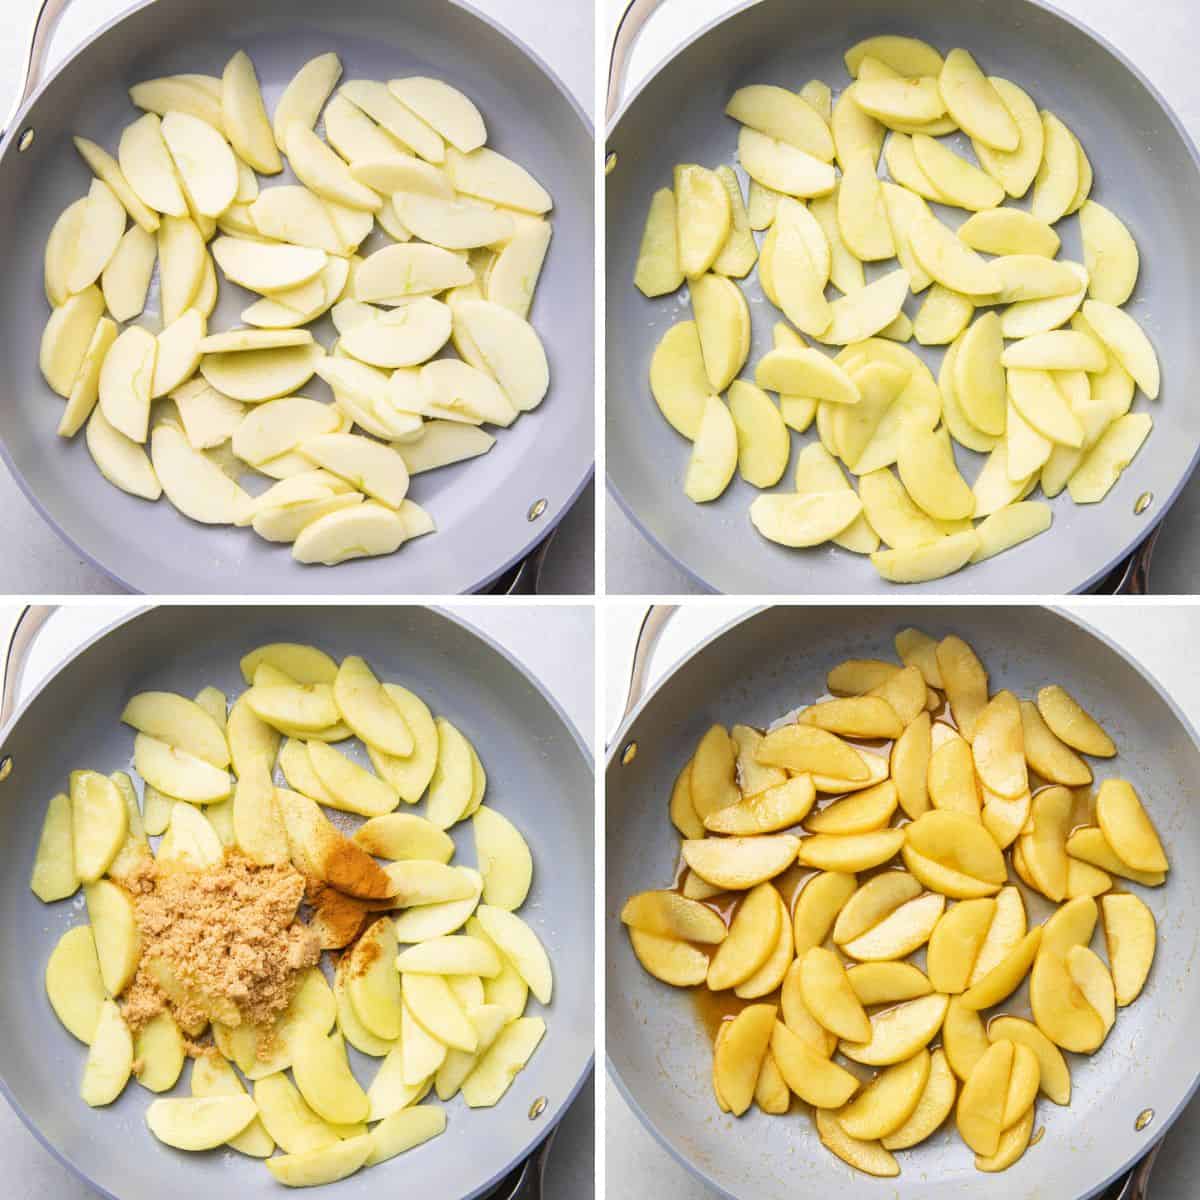 Process photos of caramelizing apple slices in a skillet.